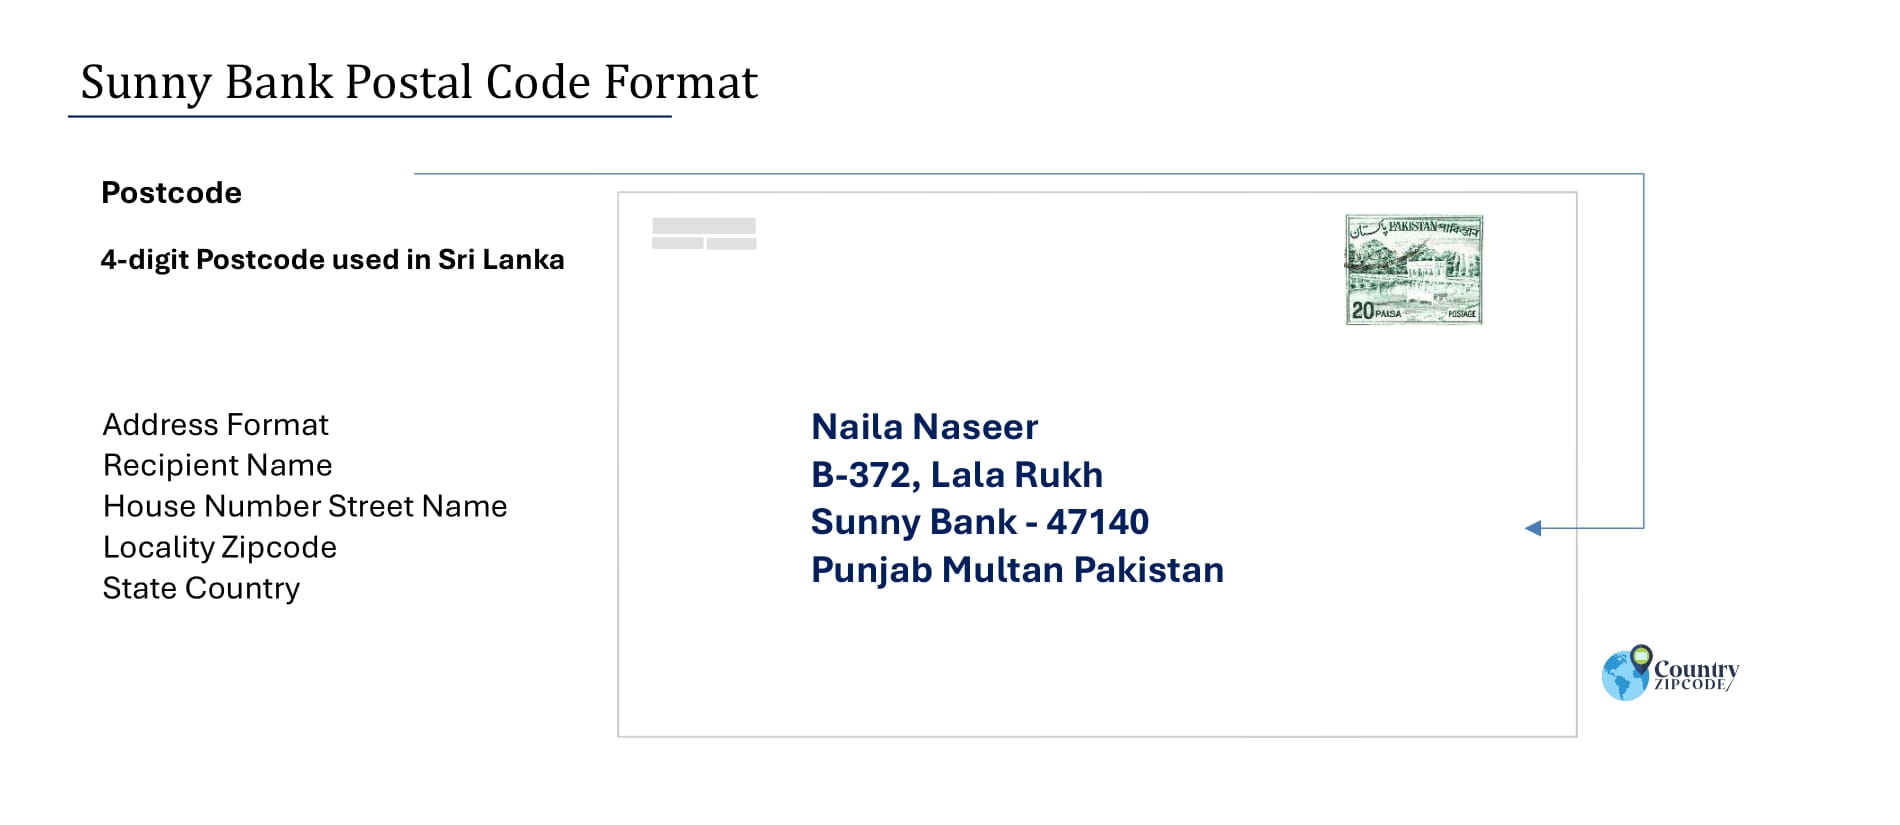 Example of Sunny Bank Pakistan Postal code and Address format